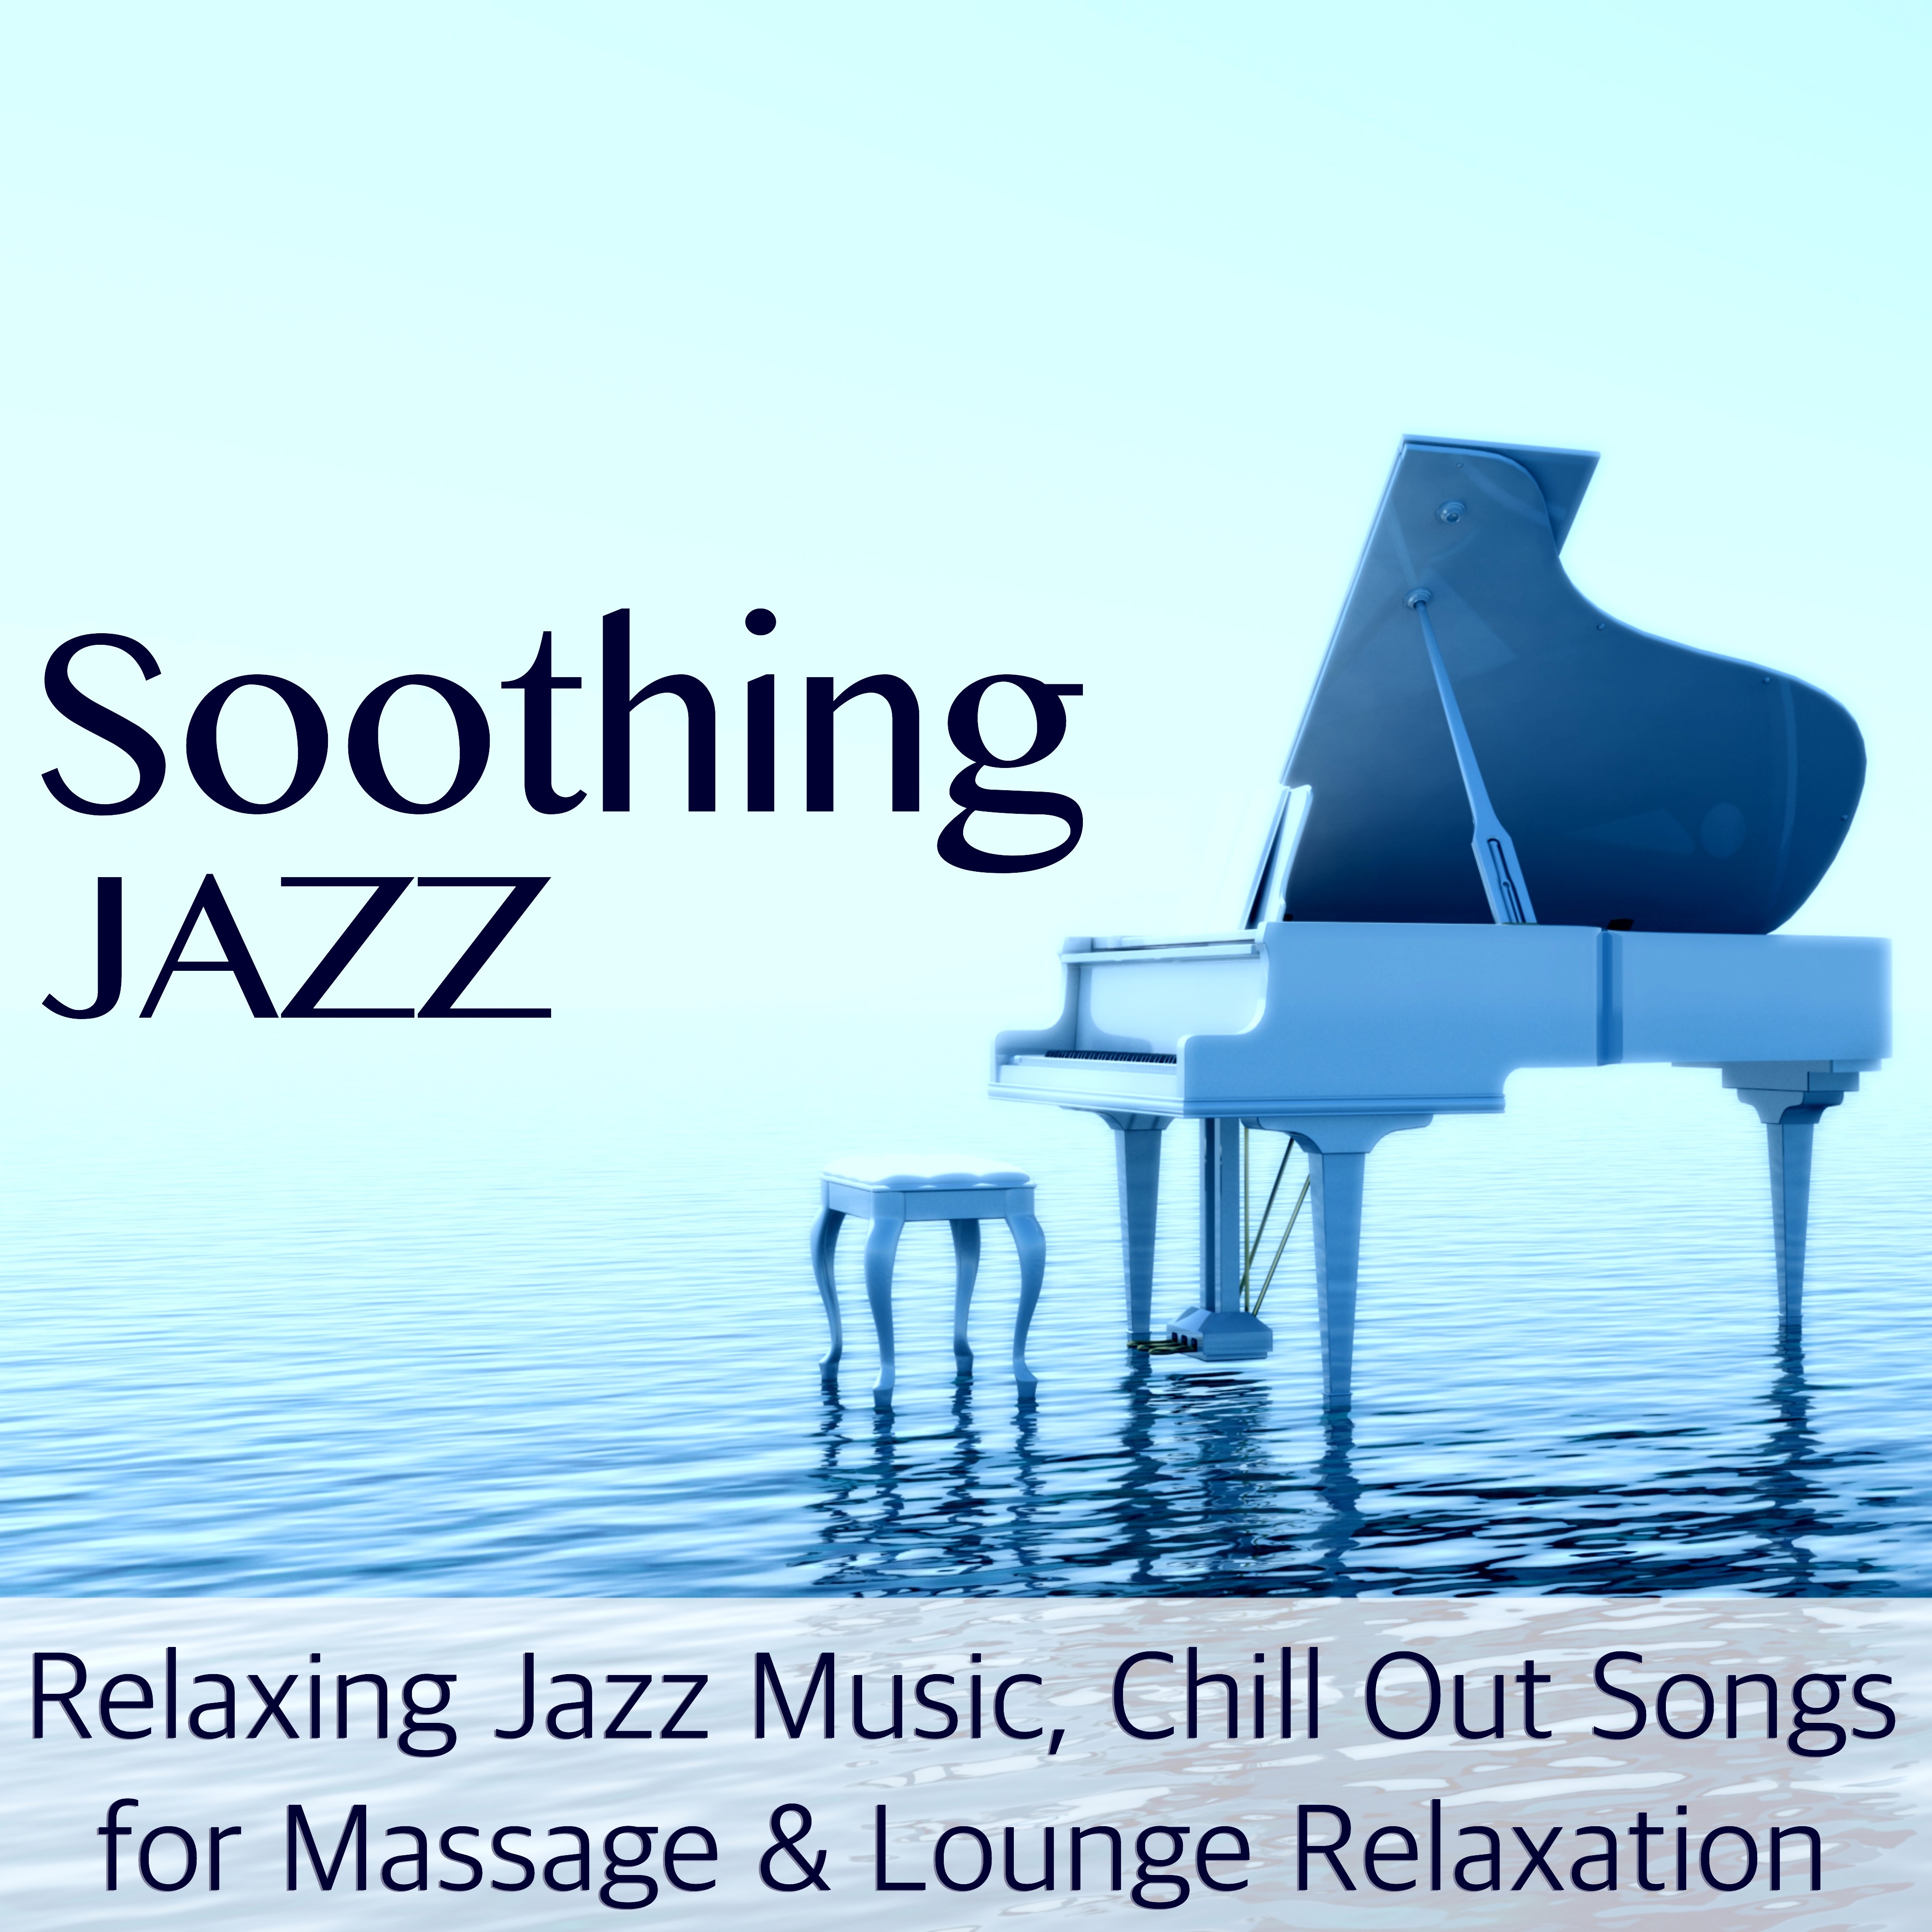 Soothing Jazz - Relaxing Jazz Music, Chill Out Songs for Massage & Lounge Relaxation